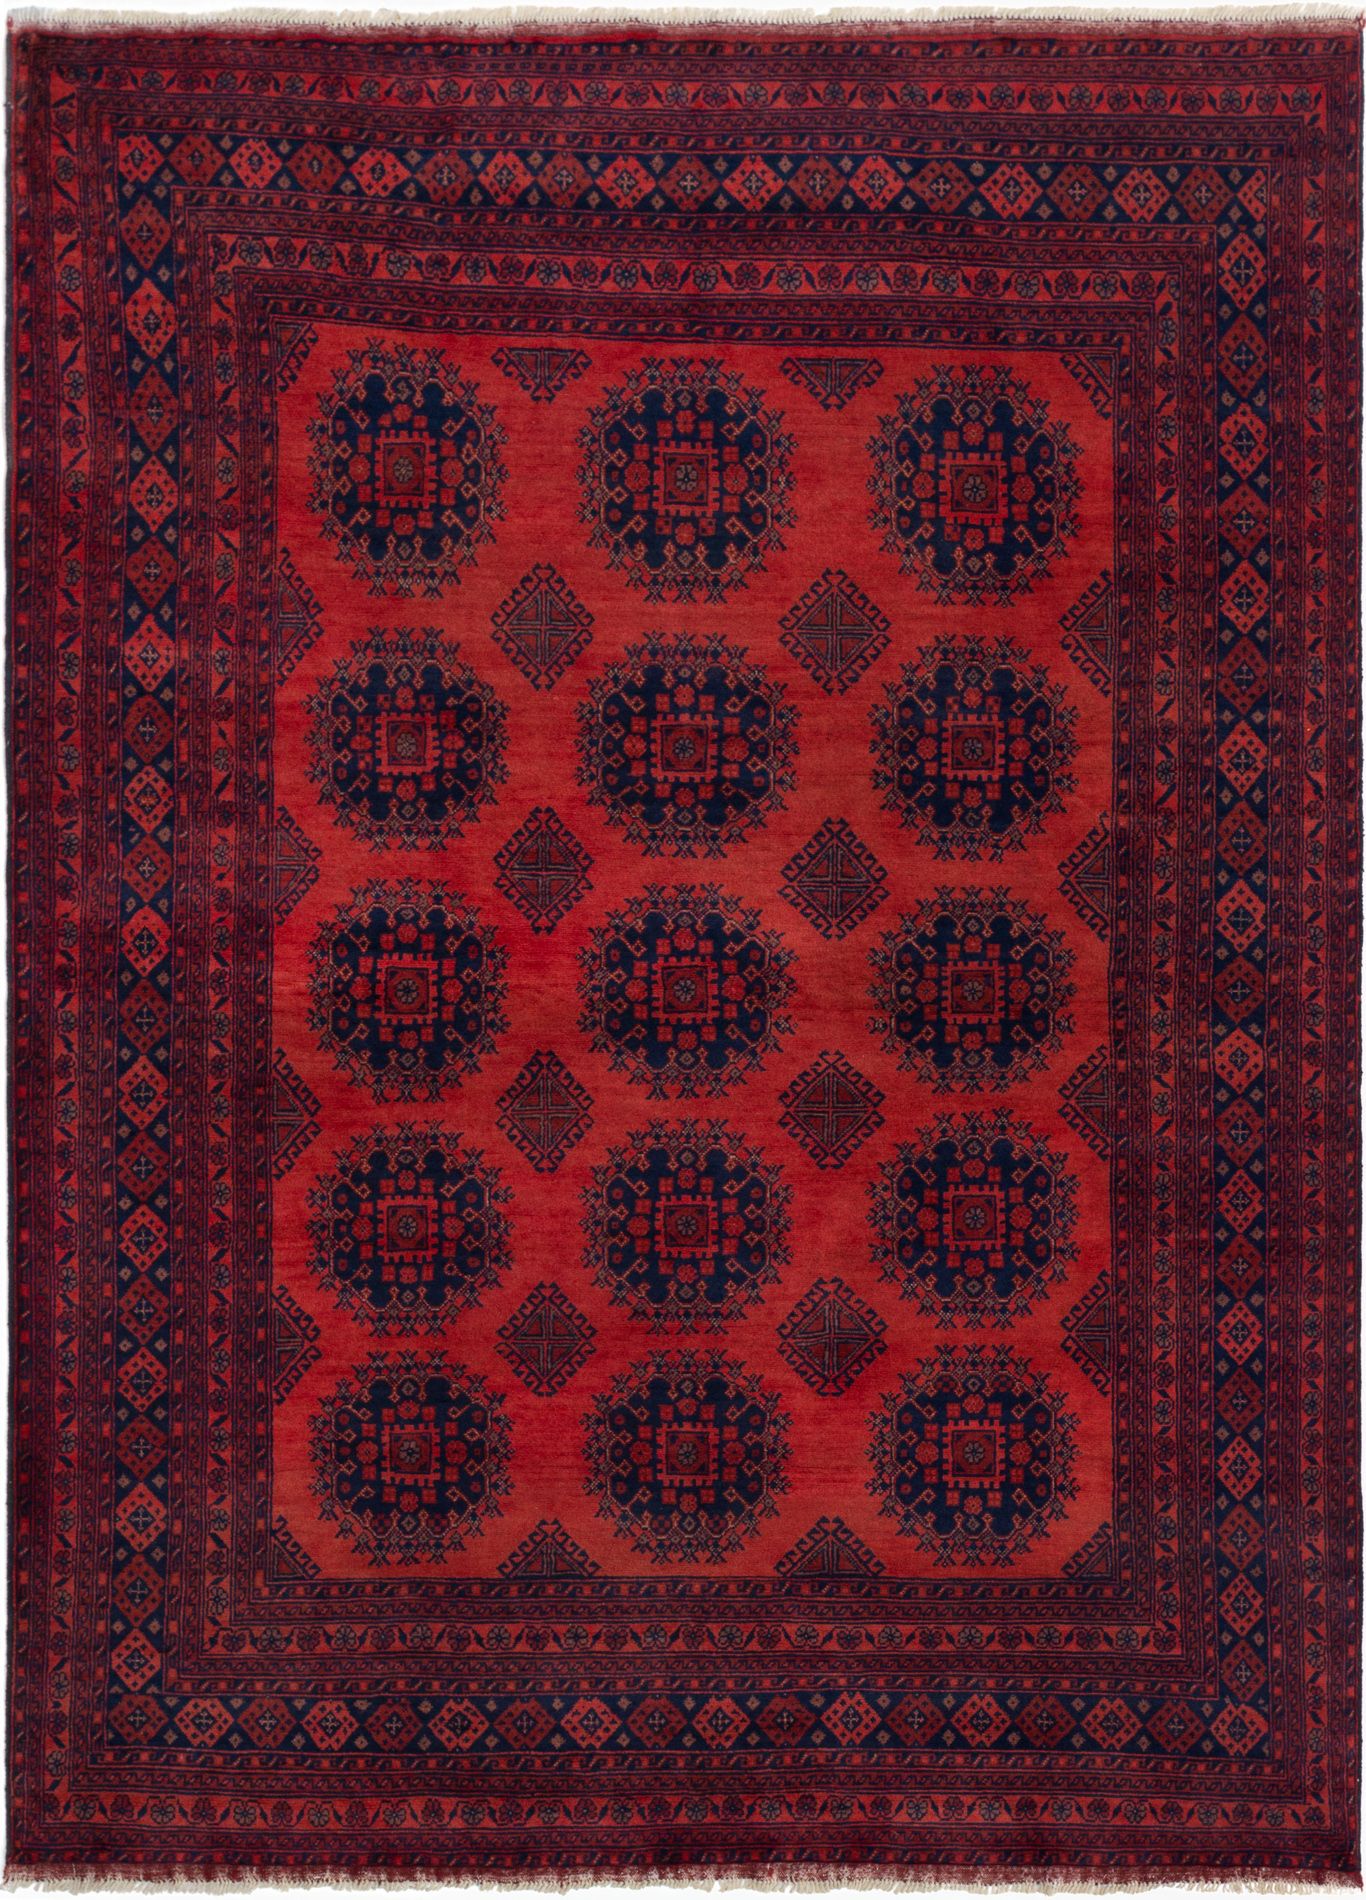 Hand-knotted Finest Khal Mohammadi Dark Copper Wool Rug 6'10" x 9'5" Size: 6'10" x 9'5"  